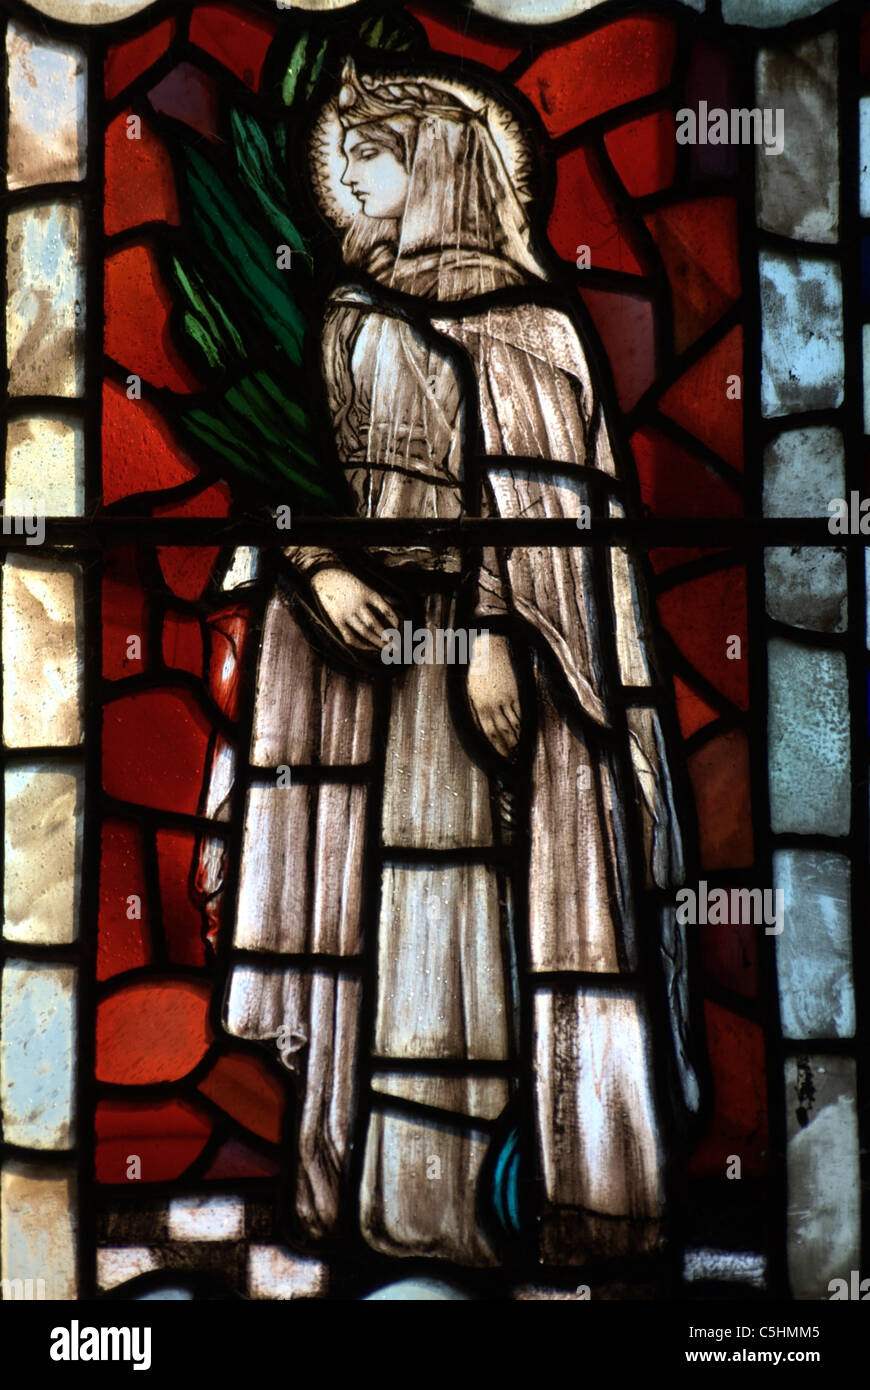 Section of stained glass depicting St.Agnes the patron Saint of young girls due to her chastity and refusal to marry. Stock Photo